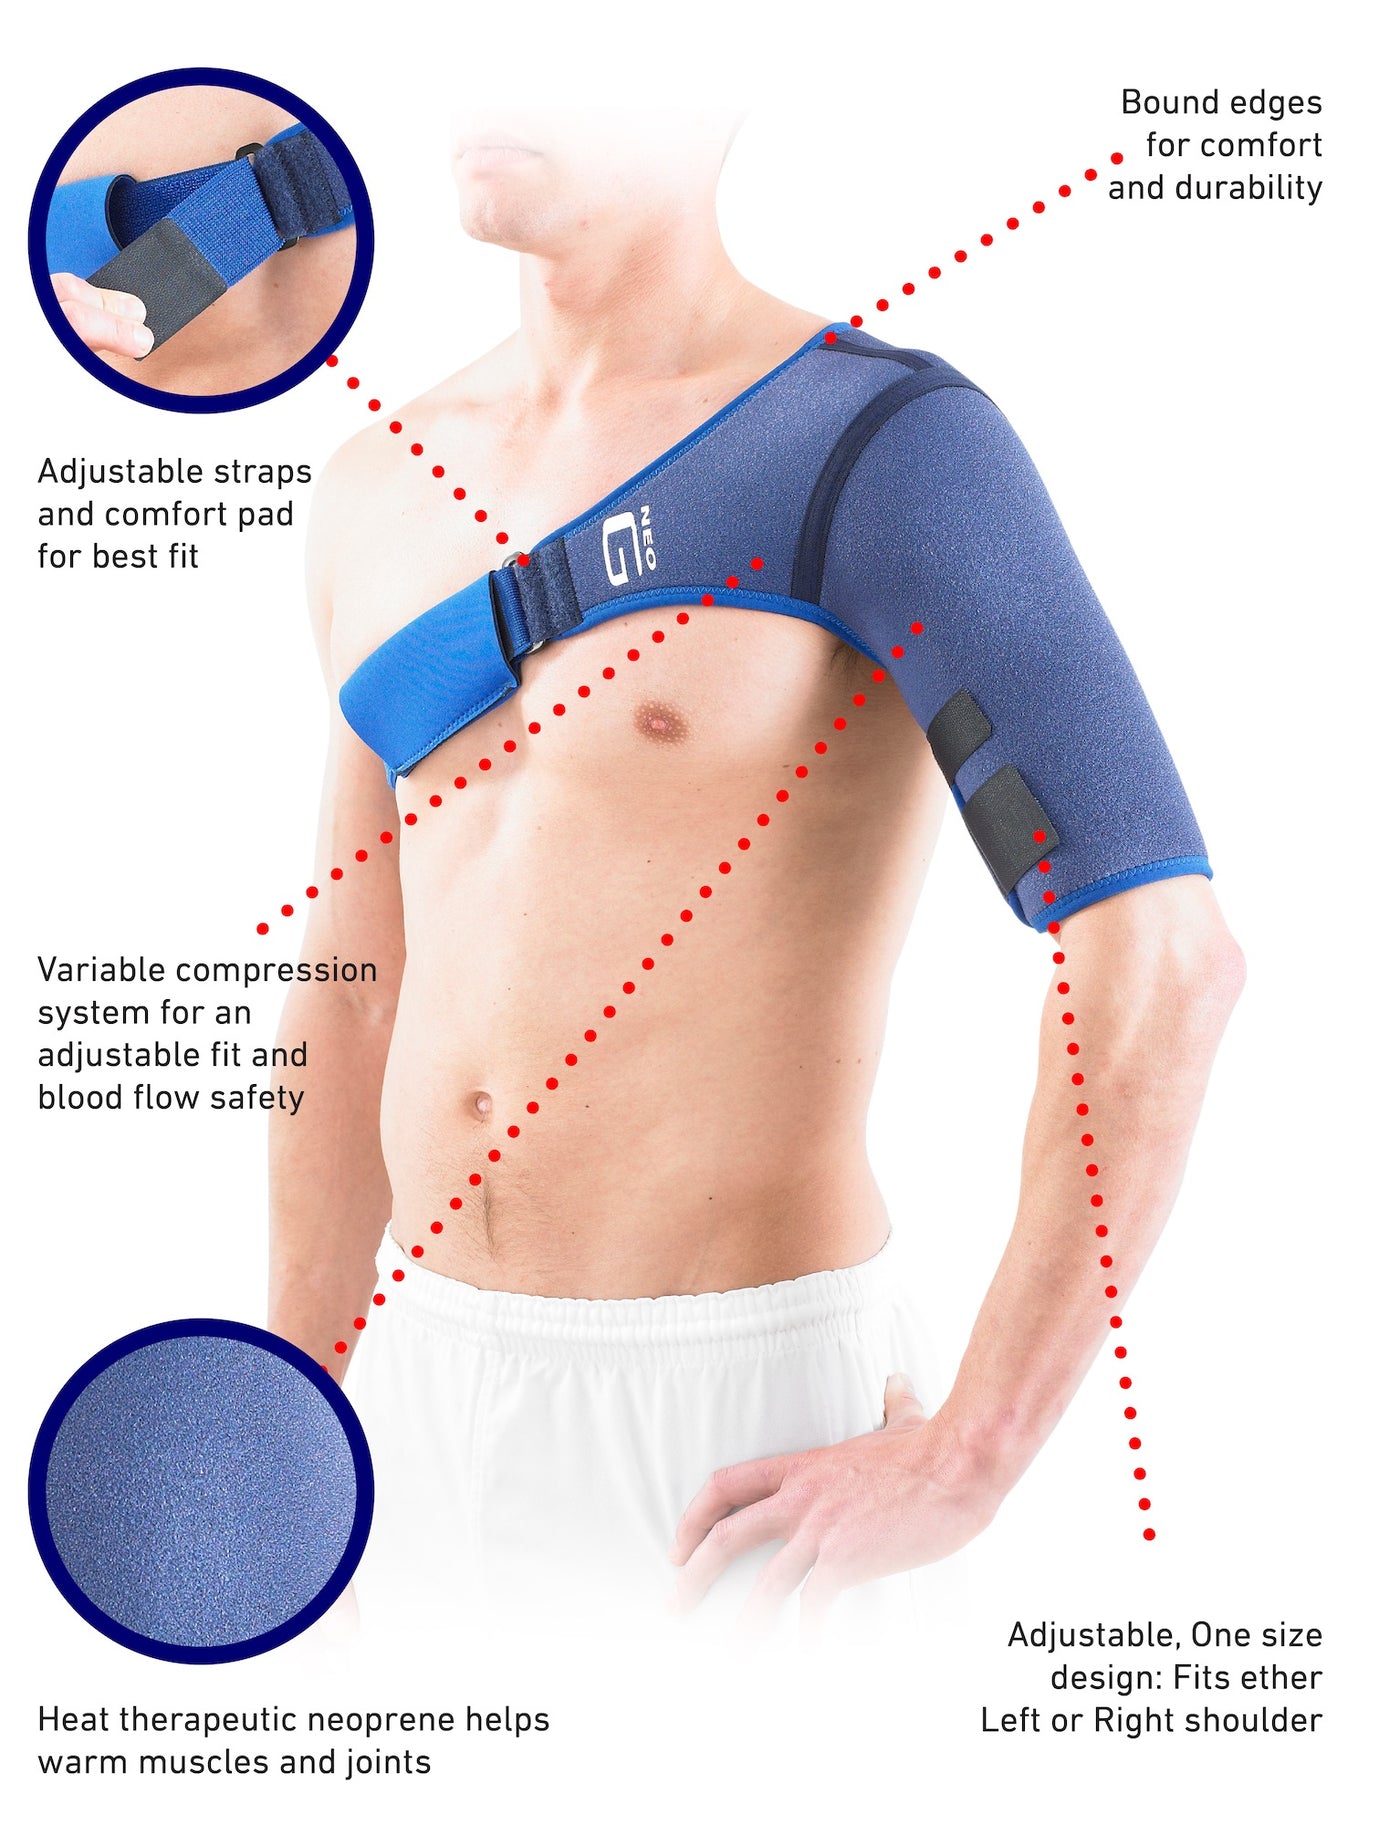 The Opti-Fit Comfort Strap System 